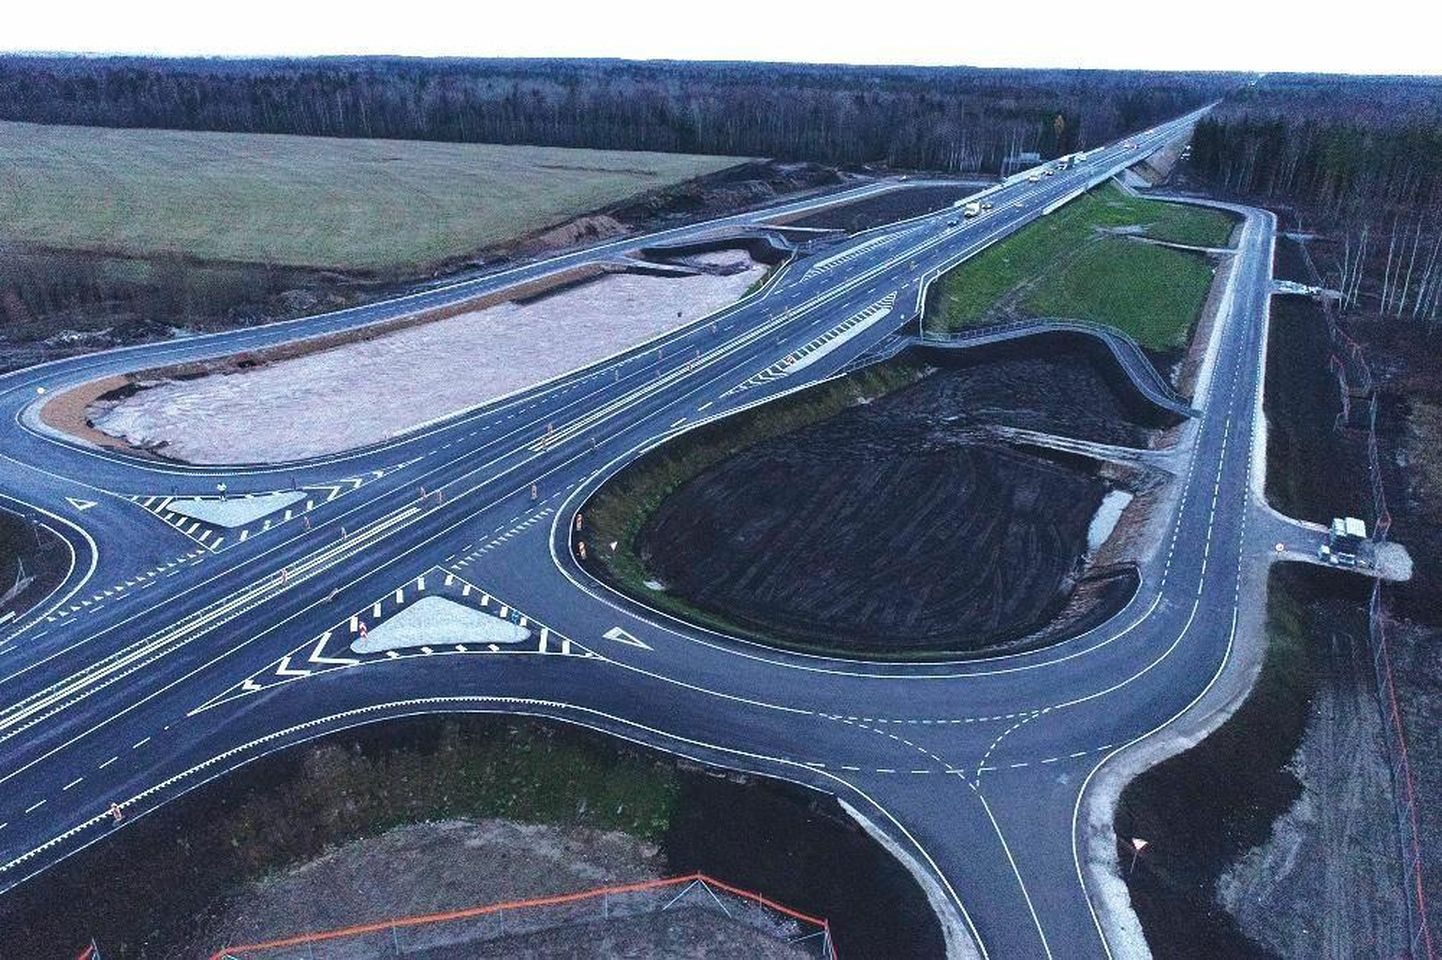 The 4.3-kilometer Kärevere-Kardla section, opened at the end of November, will be the last 2+2 highway development on the Tallinn-Tartu highway in the coming years.